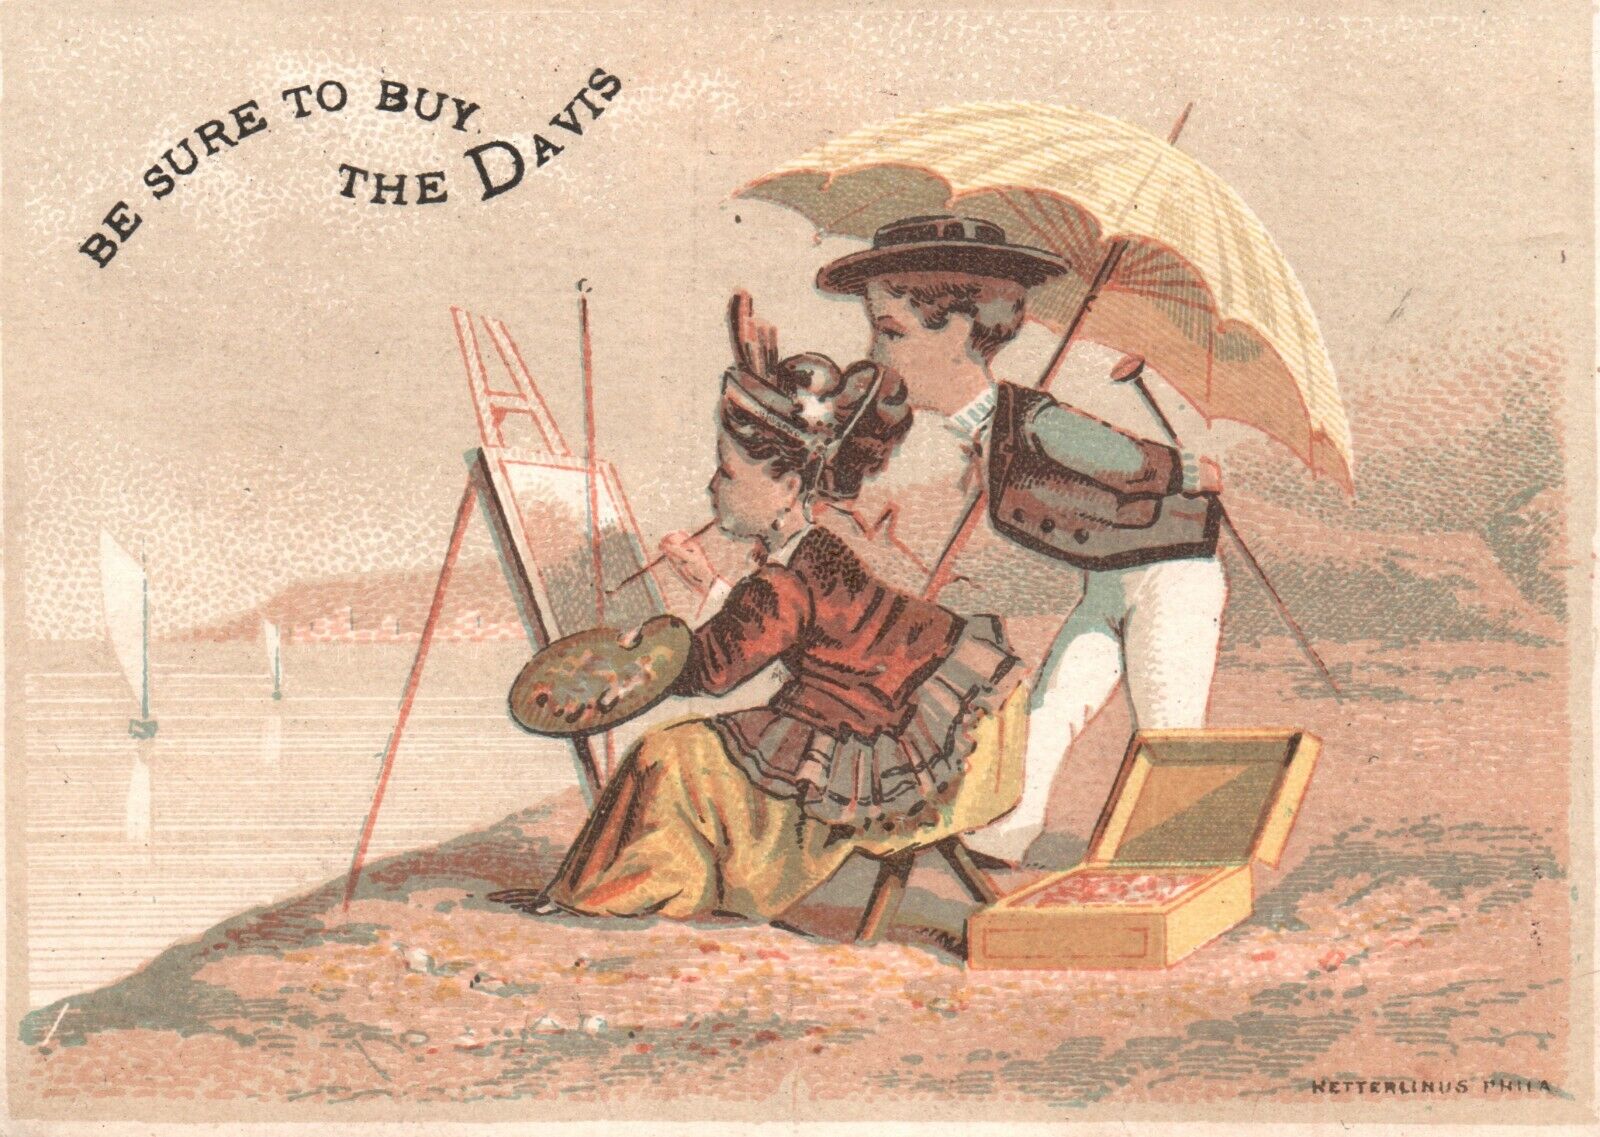 1880s-90s Be Sure to Buy the Davis Man & Woman on Beach Painting Sewing Machine